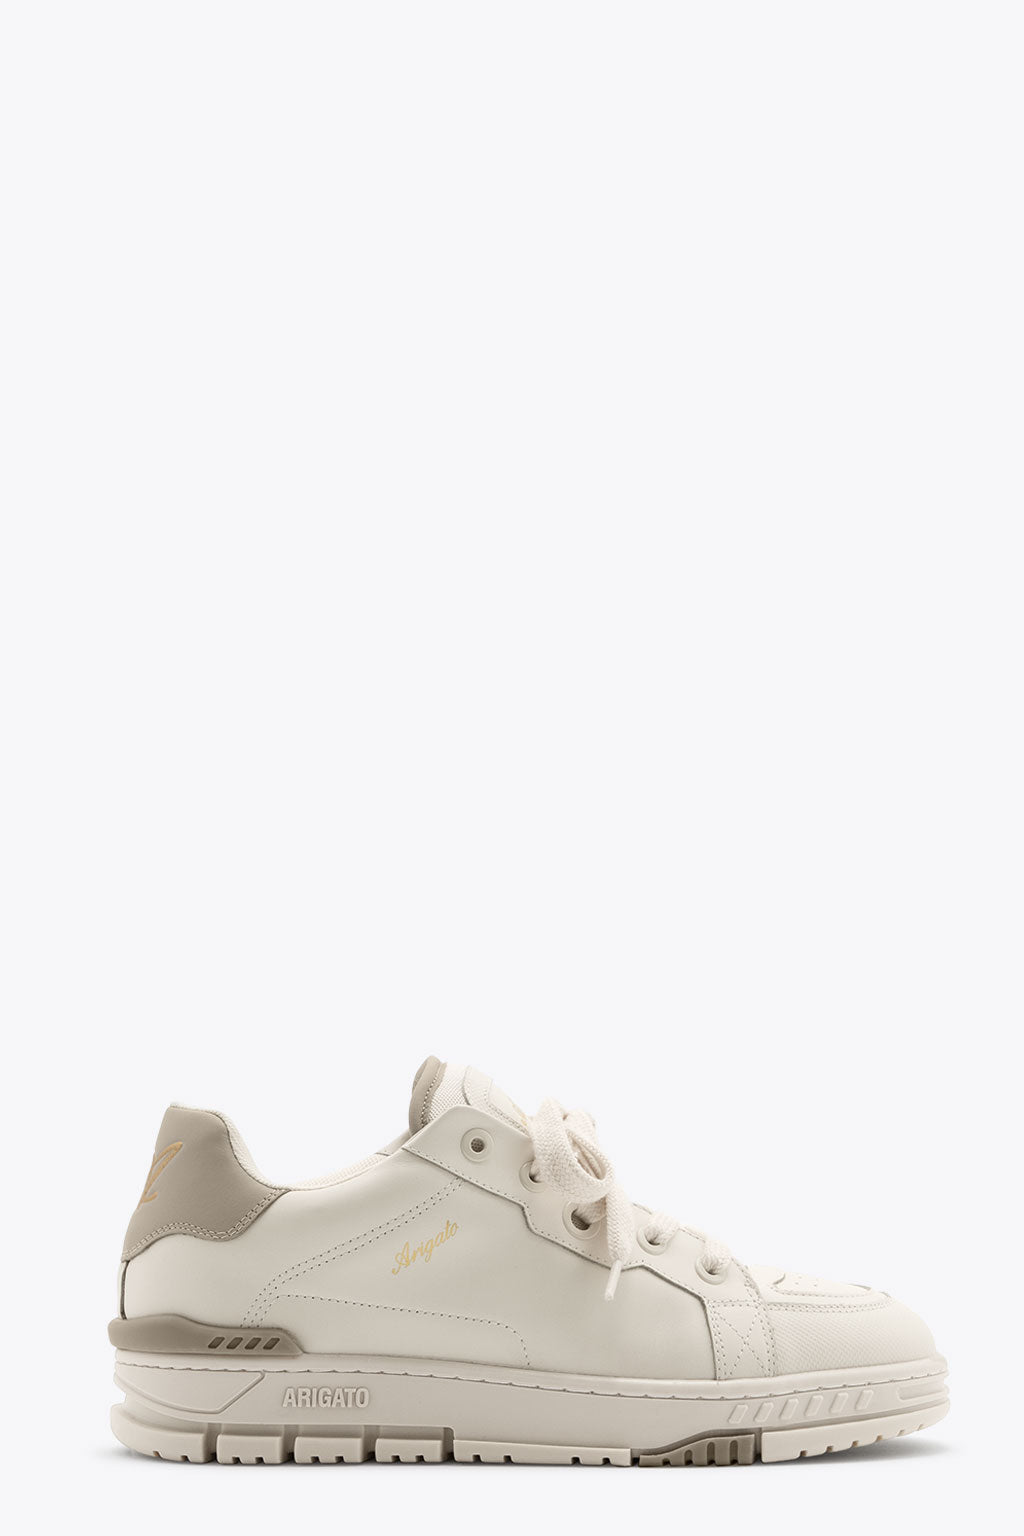 alt-image__Light-beige-leather-low-sneaker-with-chunky-laces---Area-Haze-sneaker